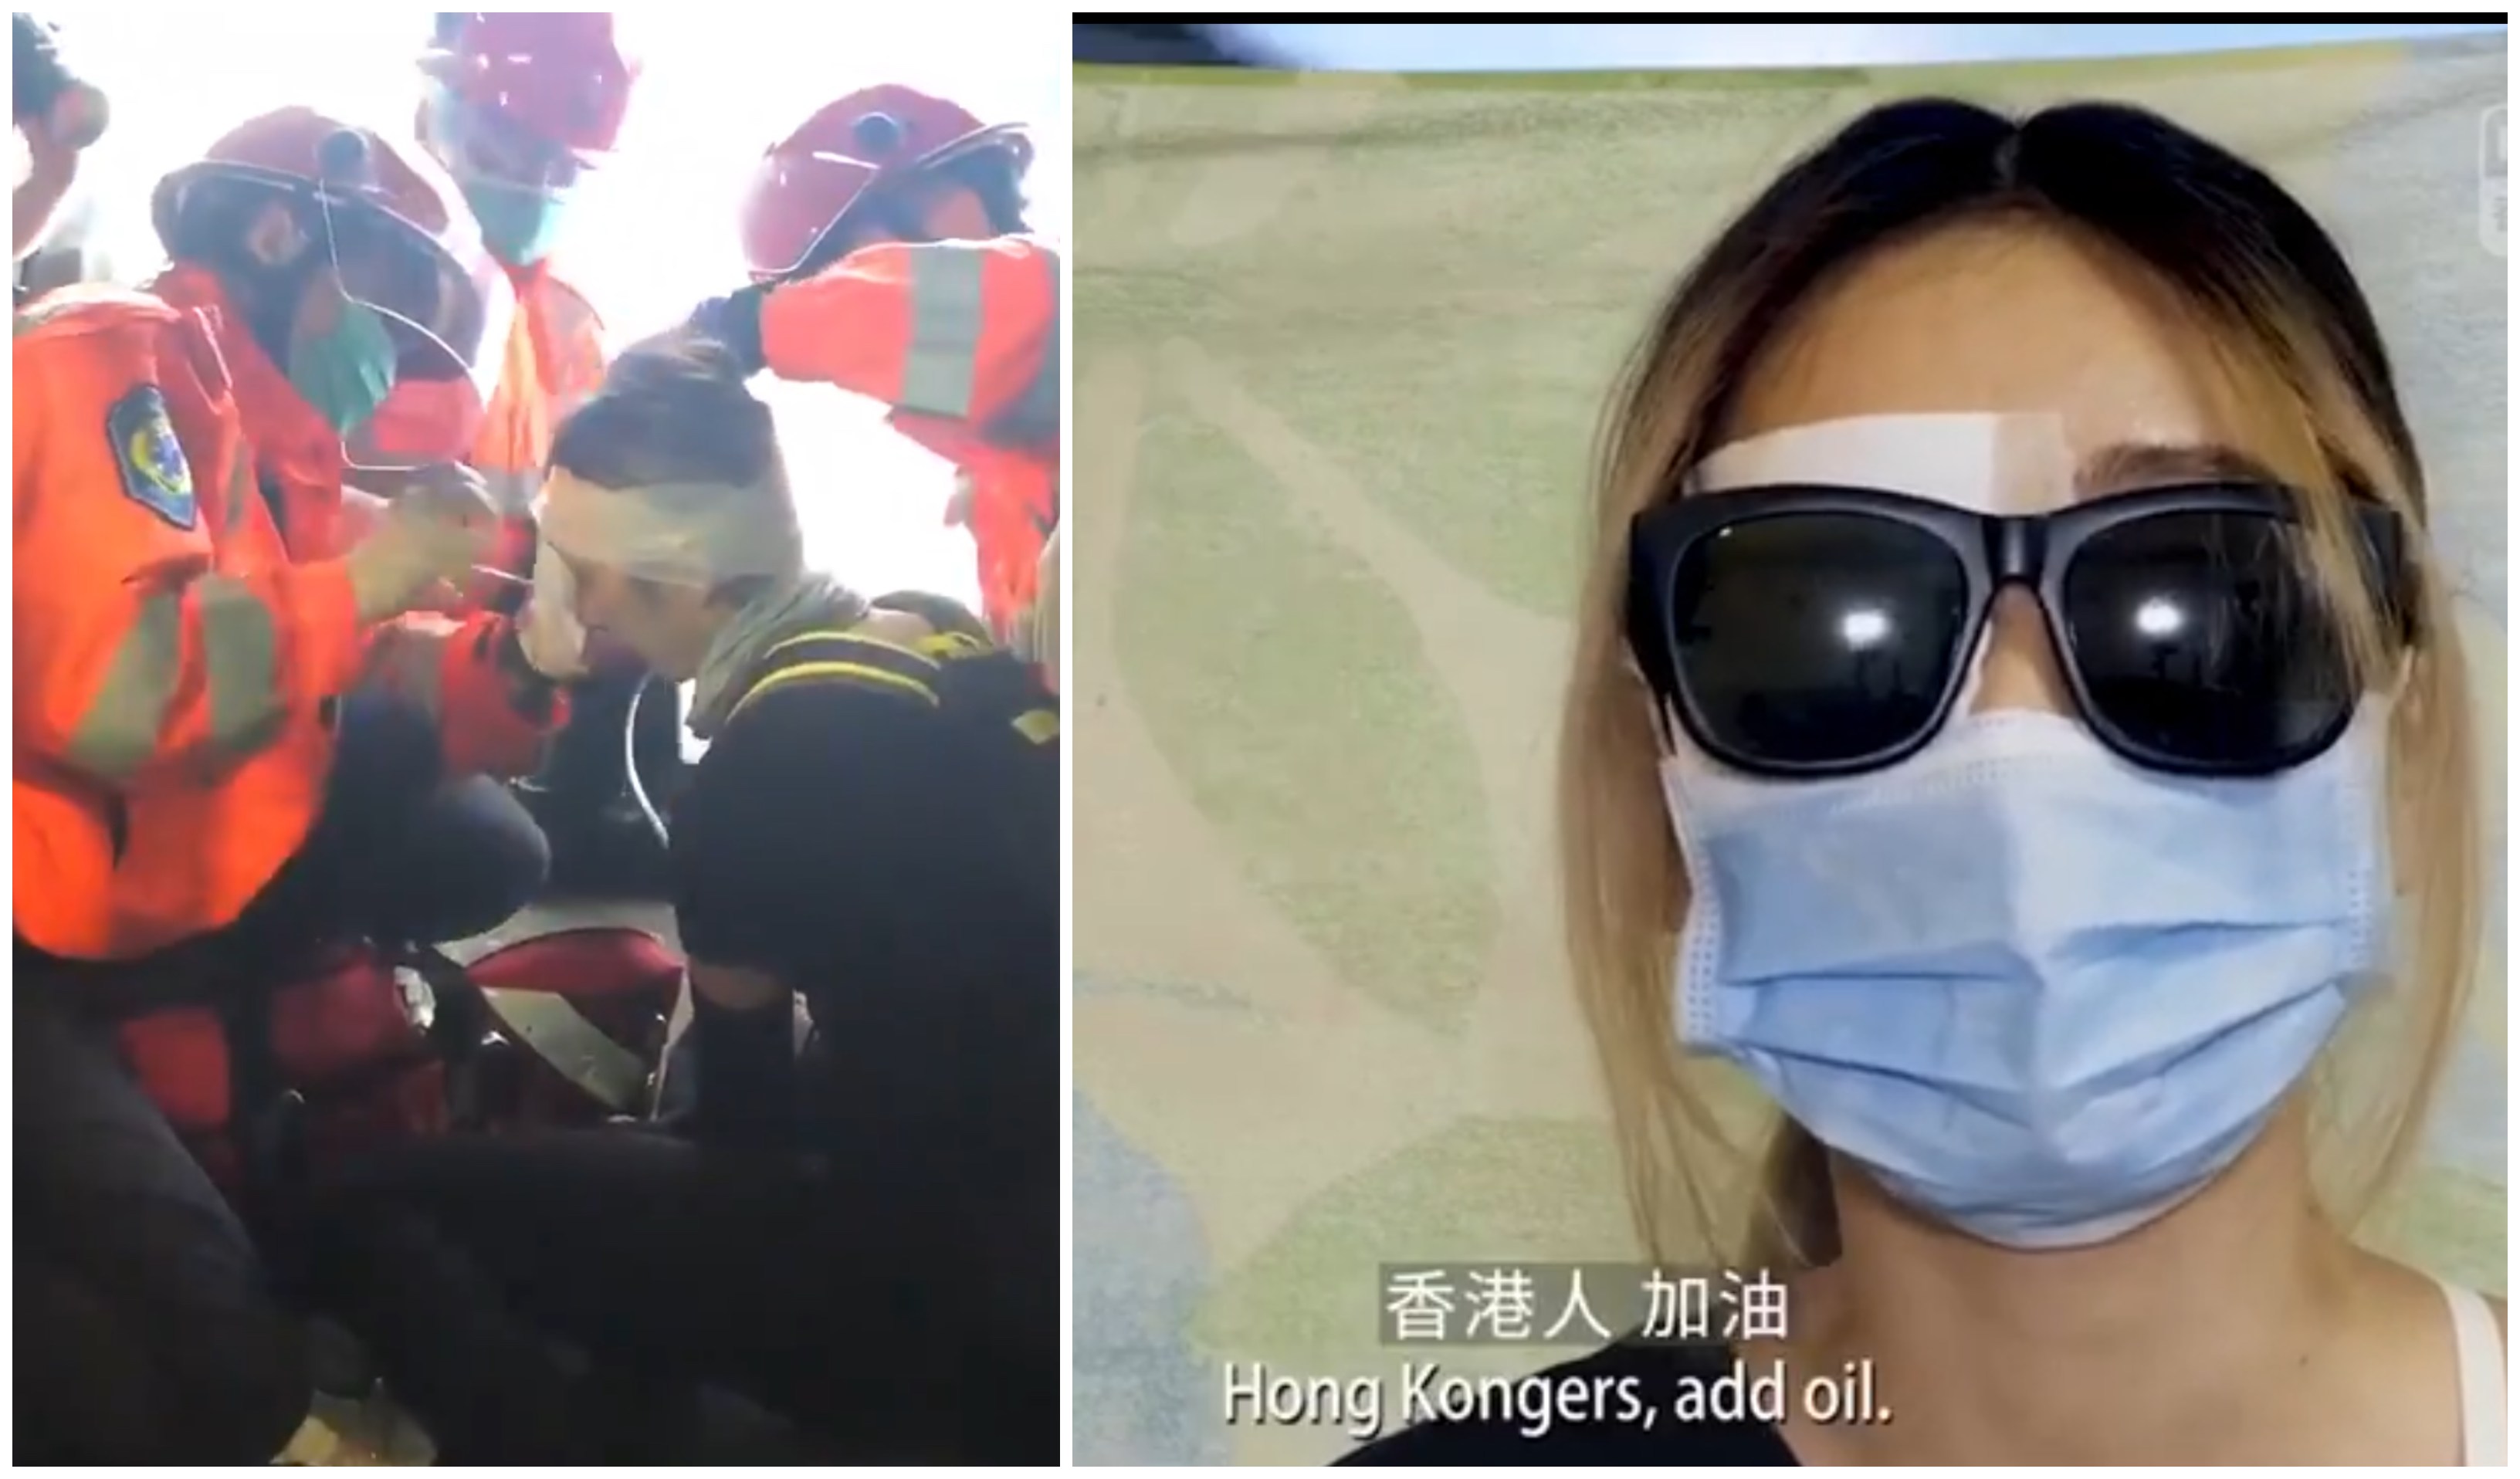 A woman identifying herself as the protester shot in the eye with a suspected bean bag round at a protest earlier this month (left) issued a video statement today slamming the government (right). Screengrabs via Facebook.